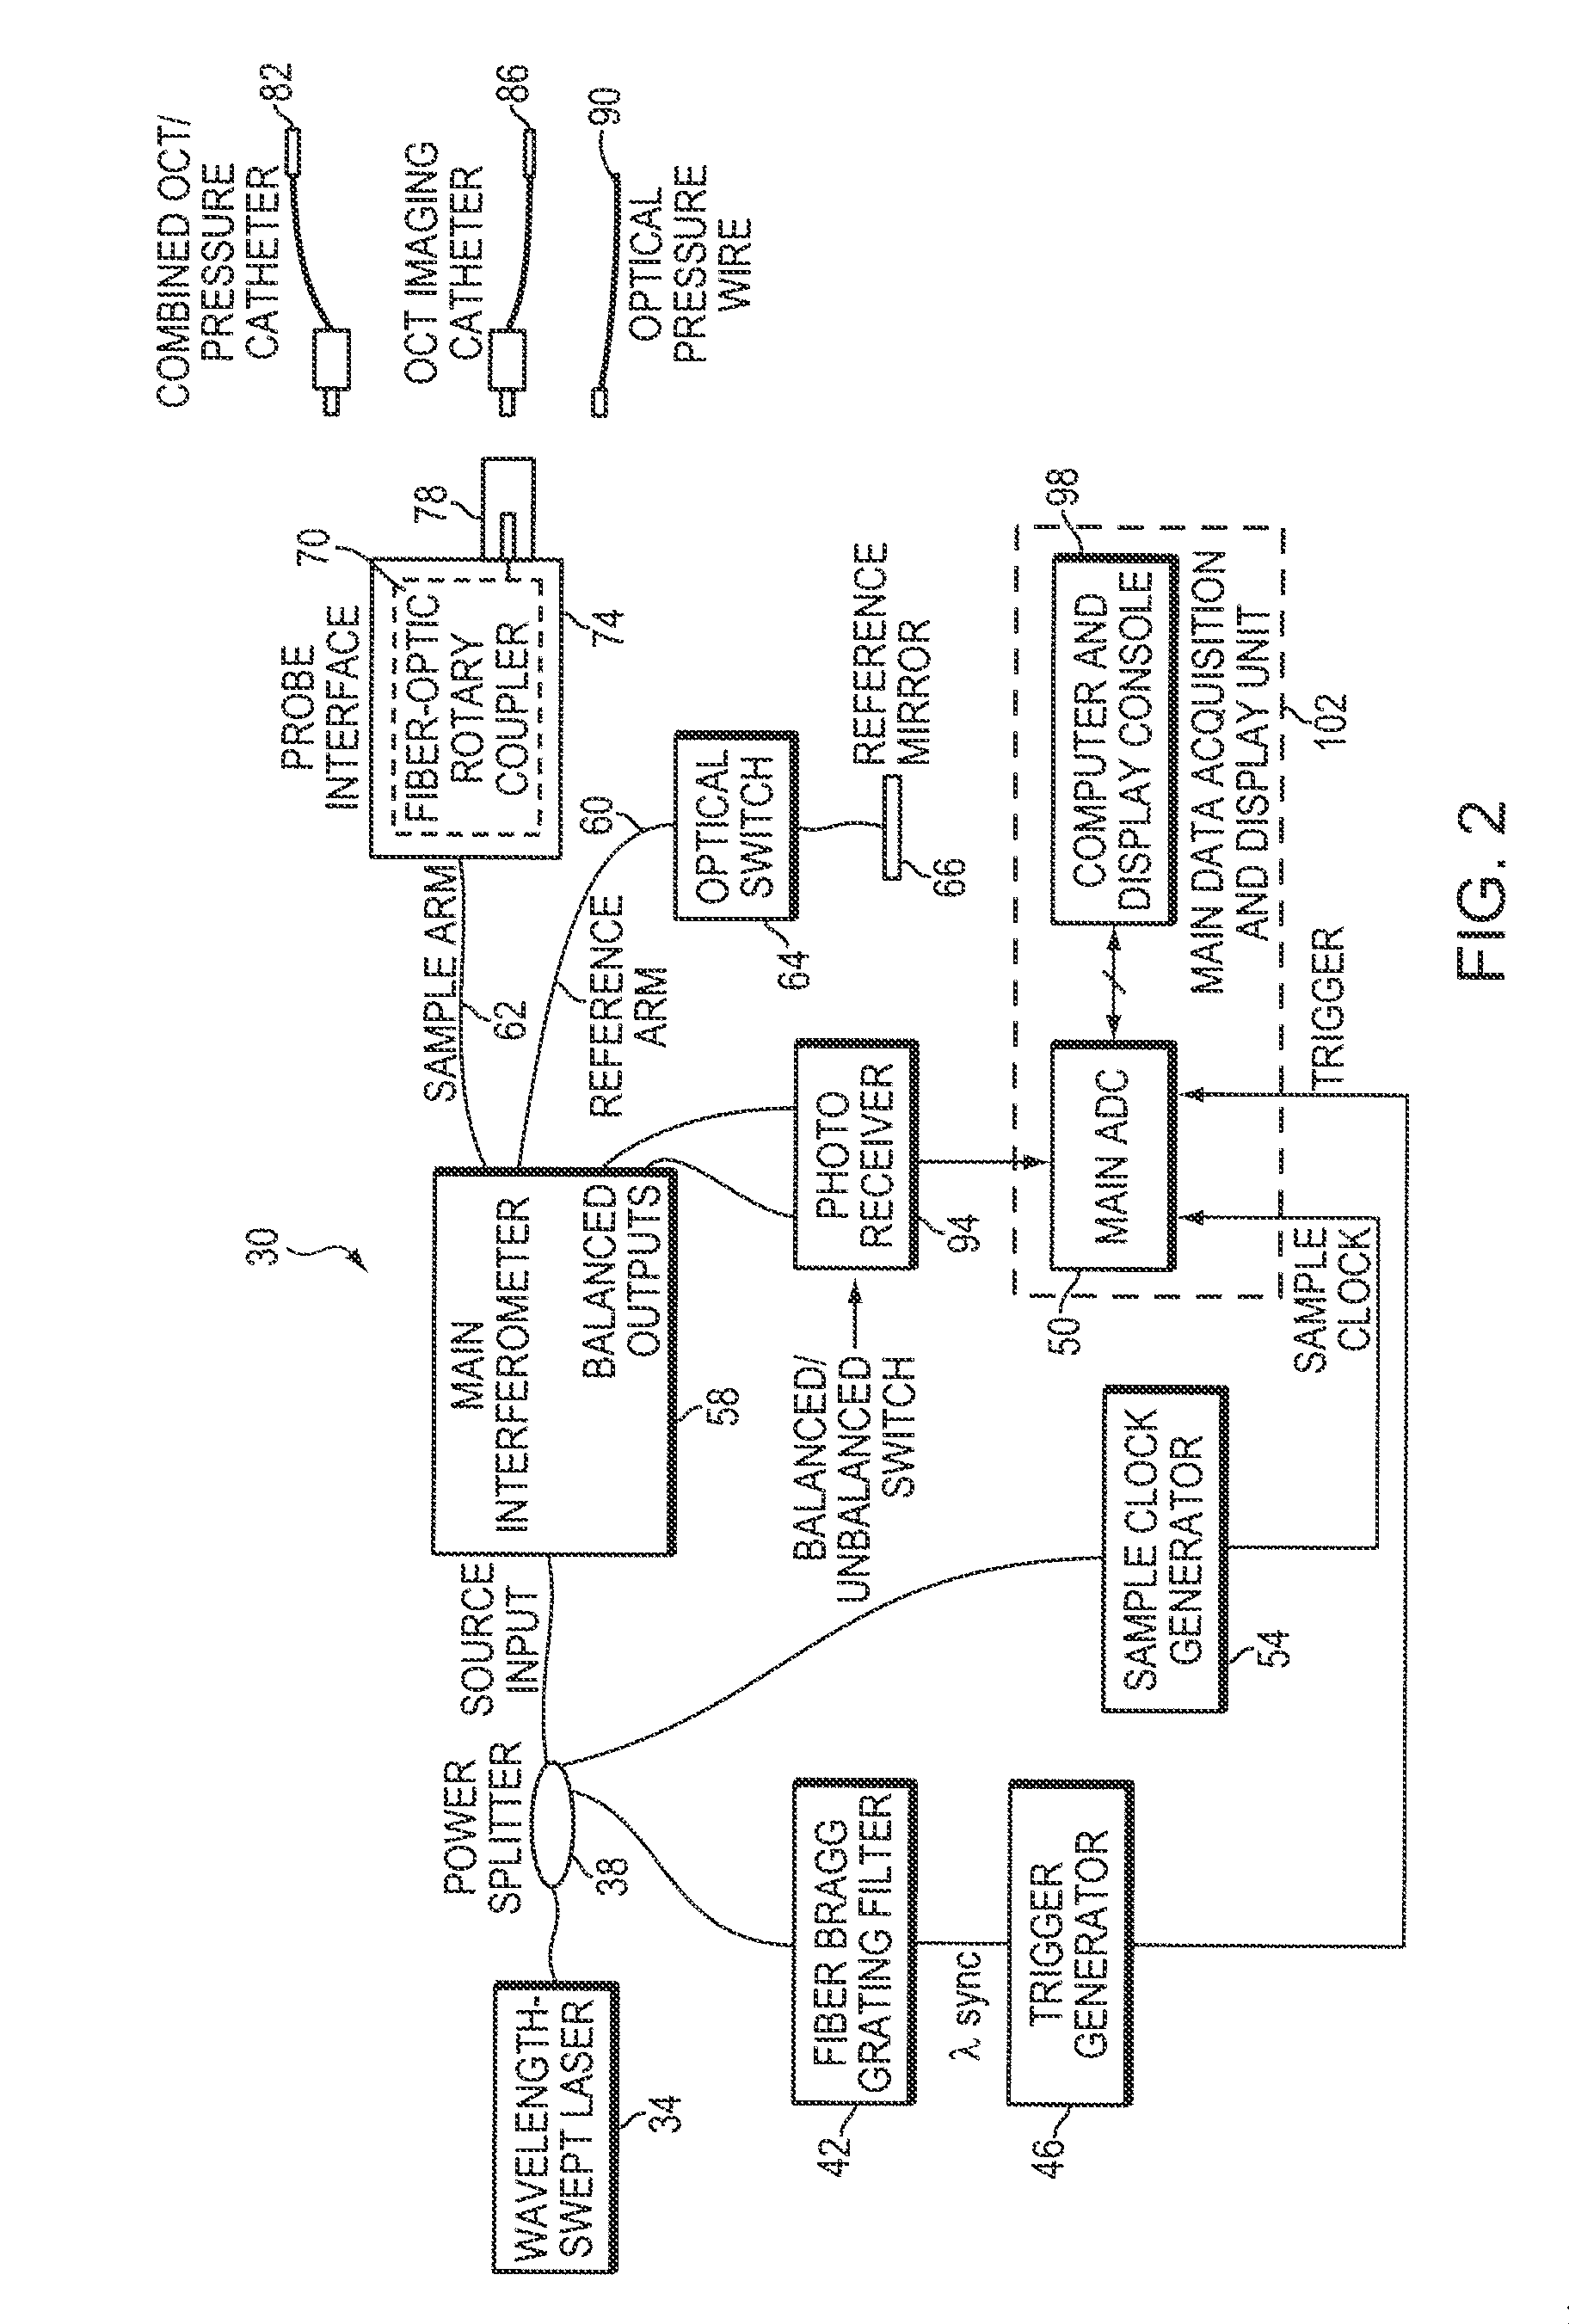 Intravascular Optical Coherence Tomography System with Pressure Monitoring Interface and Accessories